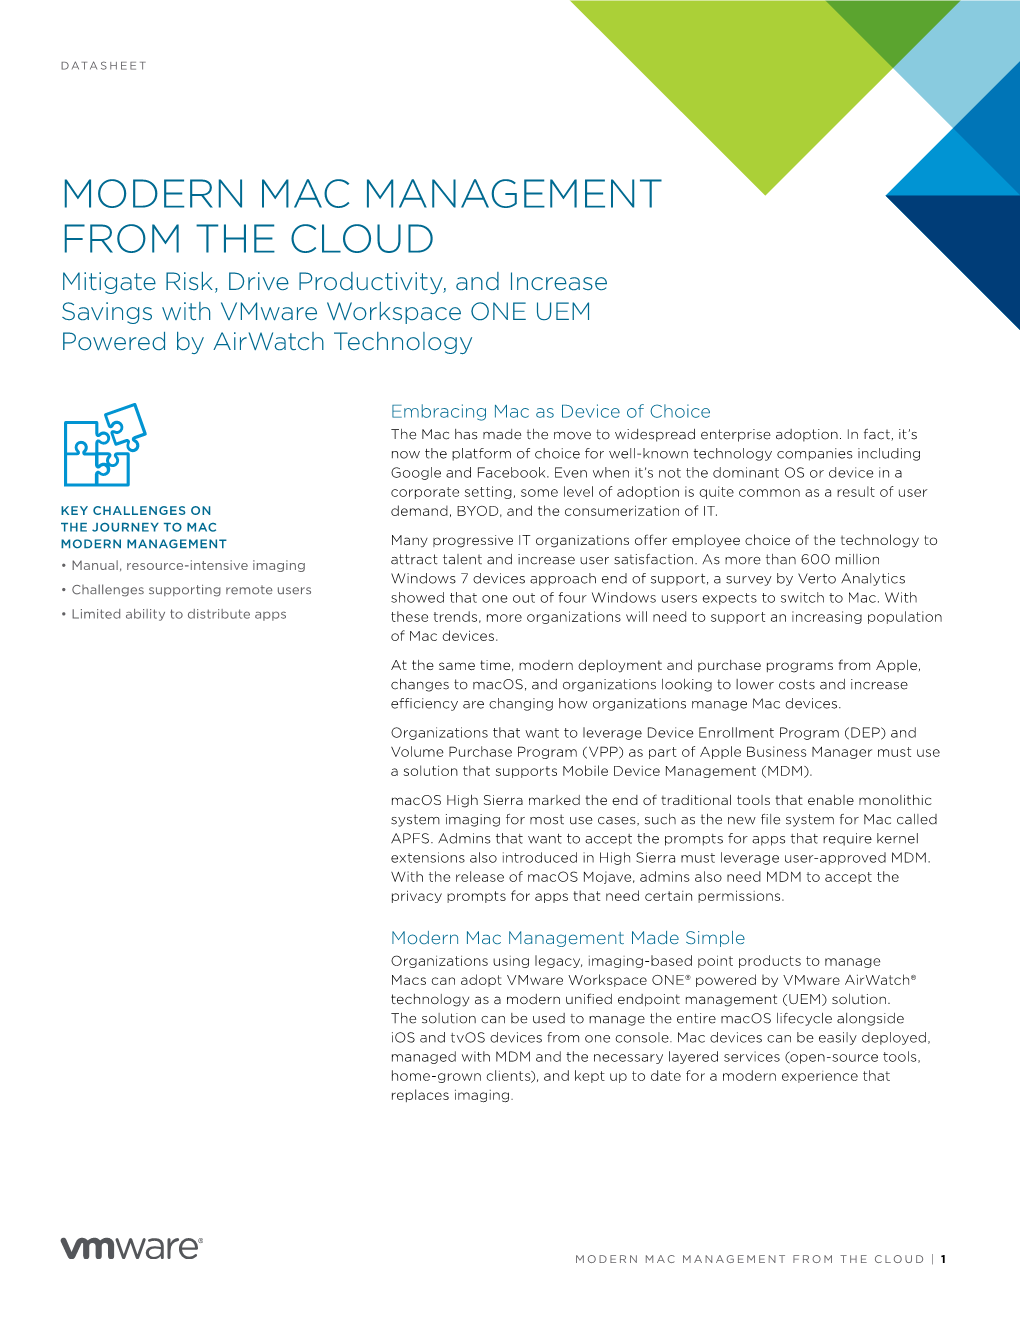 MODERN MAC MANAGEMENT from the CLOUD Mitigate Risk, Drive Productivity, and Increase Savings with Vmware Workspace ONE UEM Powered by Airwatch Technology